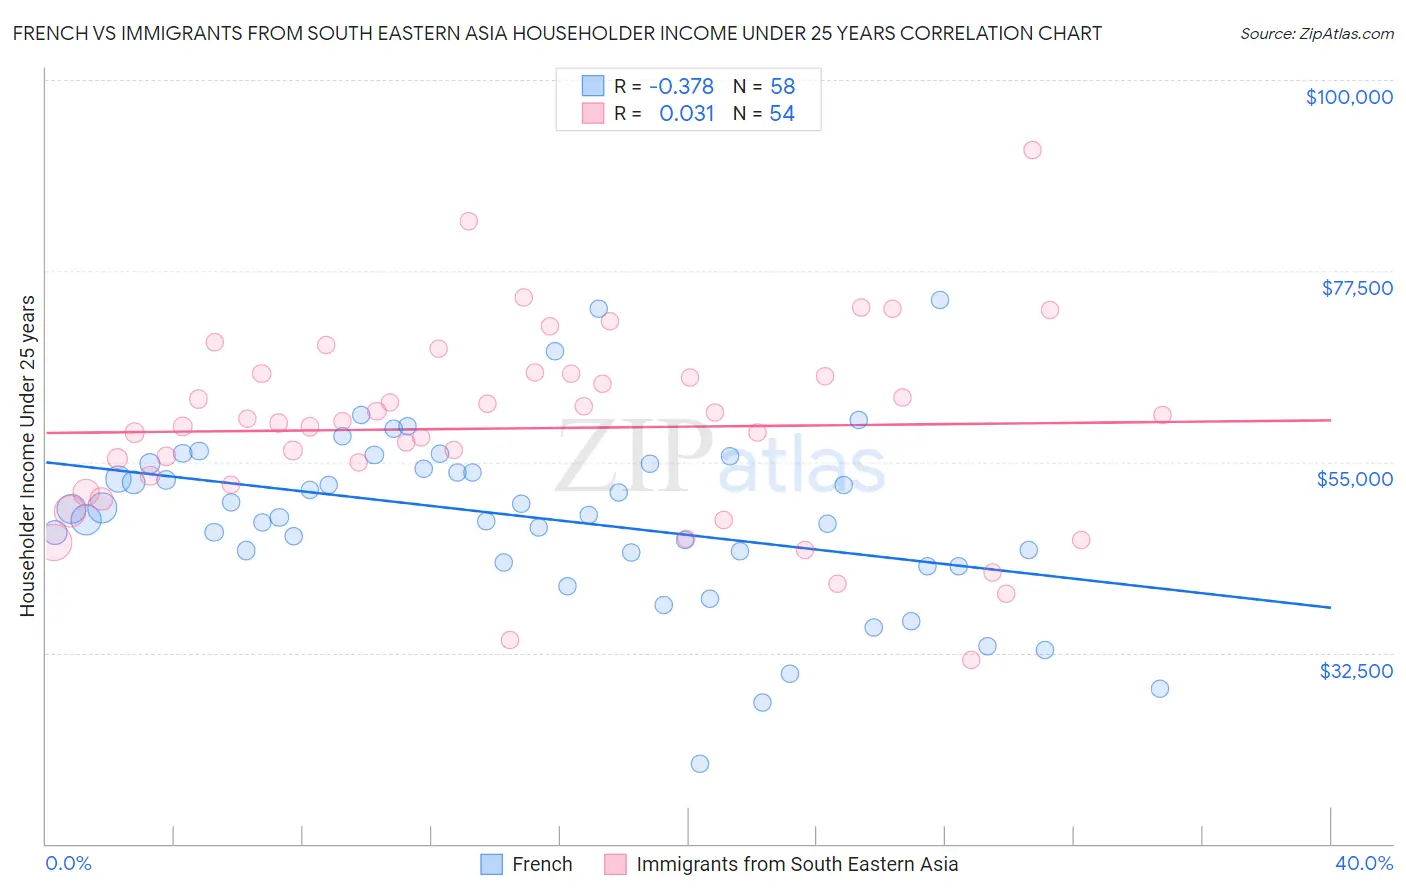 French vs Immigrants from South Eastern Asia Householder Income Under 25 years